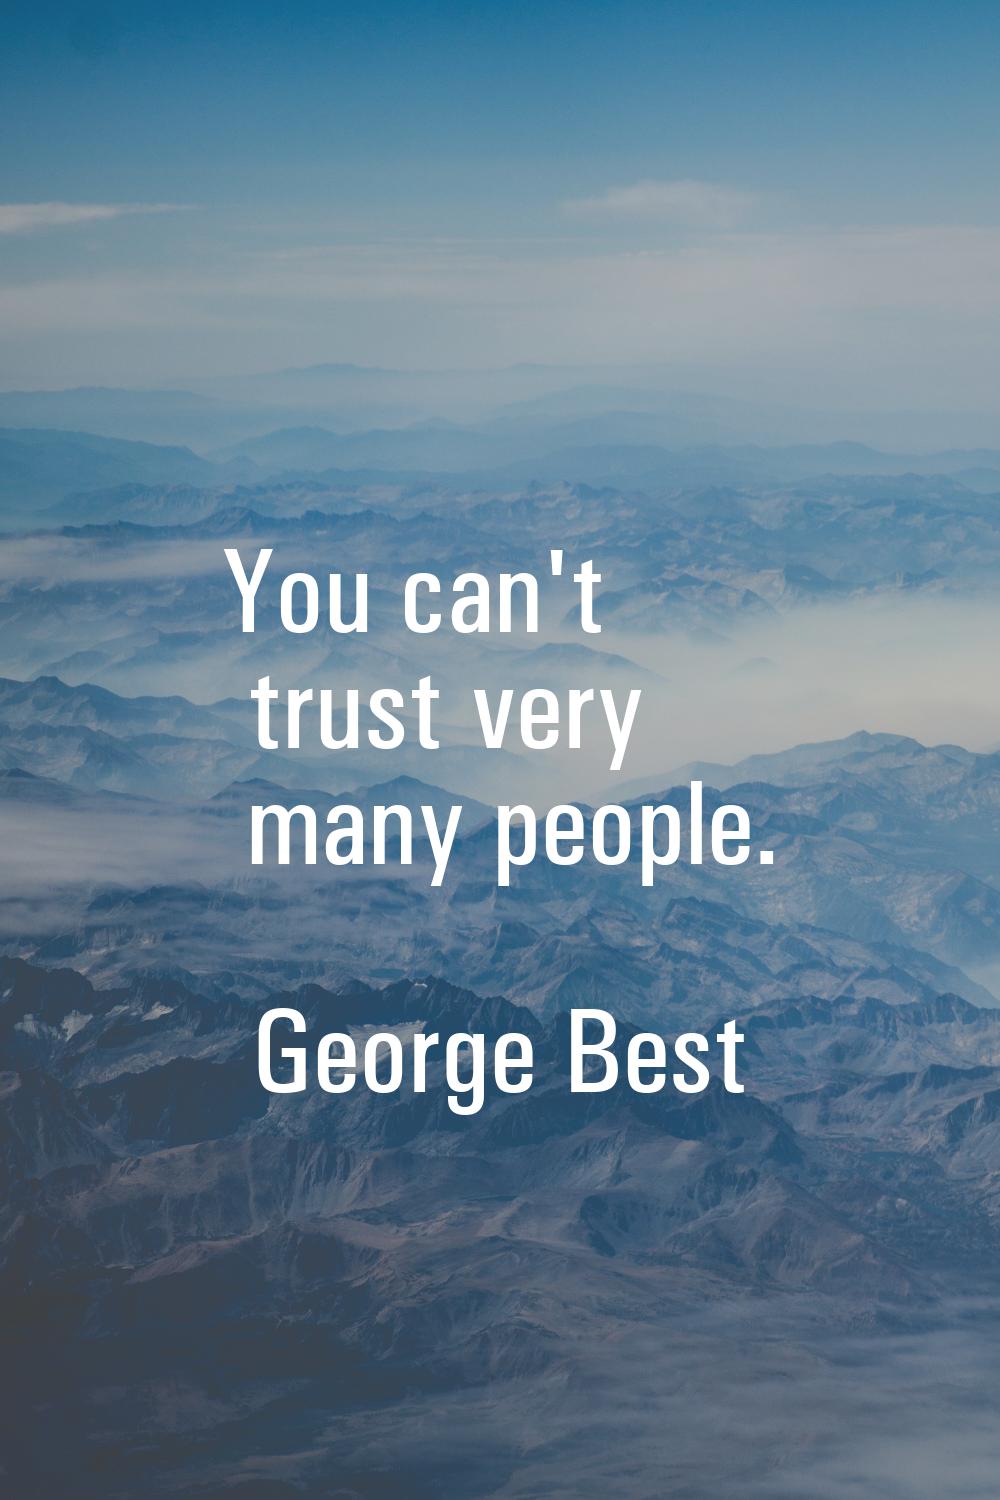 You can't trust very many people.